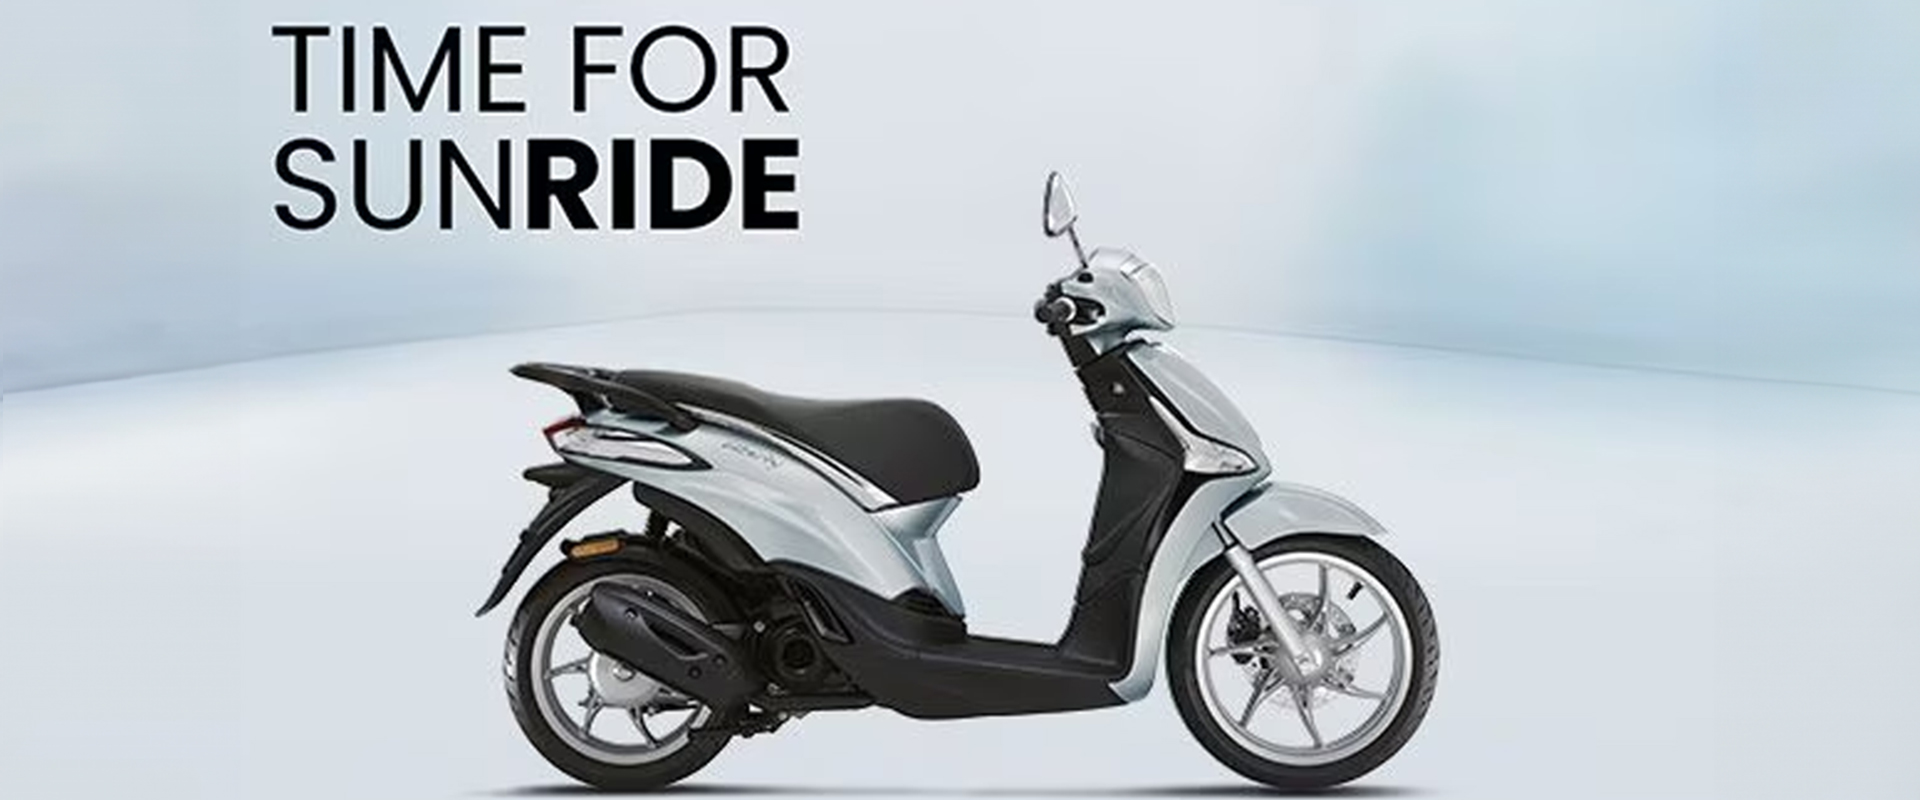 Piaggio Liberty 125 yours with 500€ discount, no down payment and no interest (TIN 0% - APR 7.76%)*.